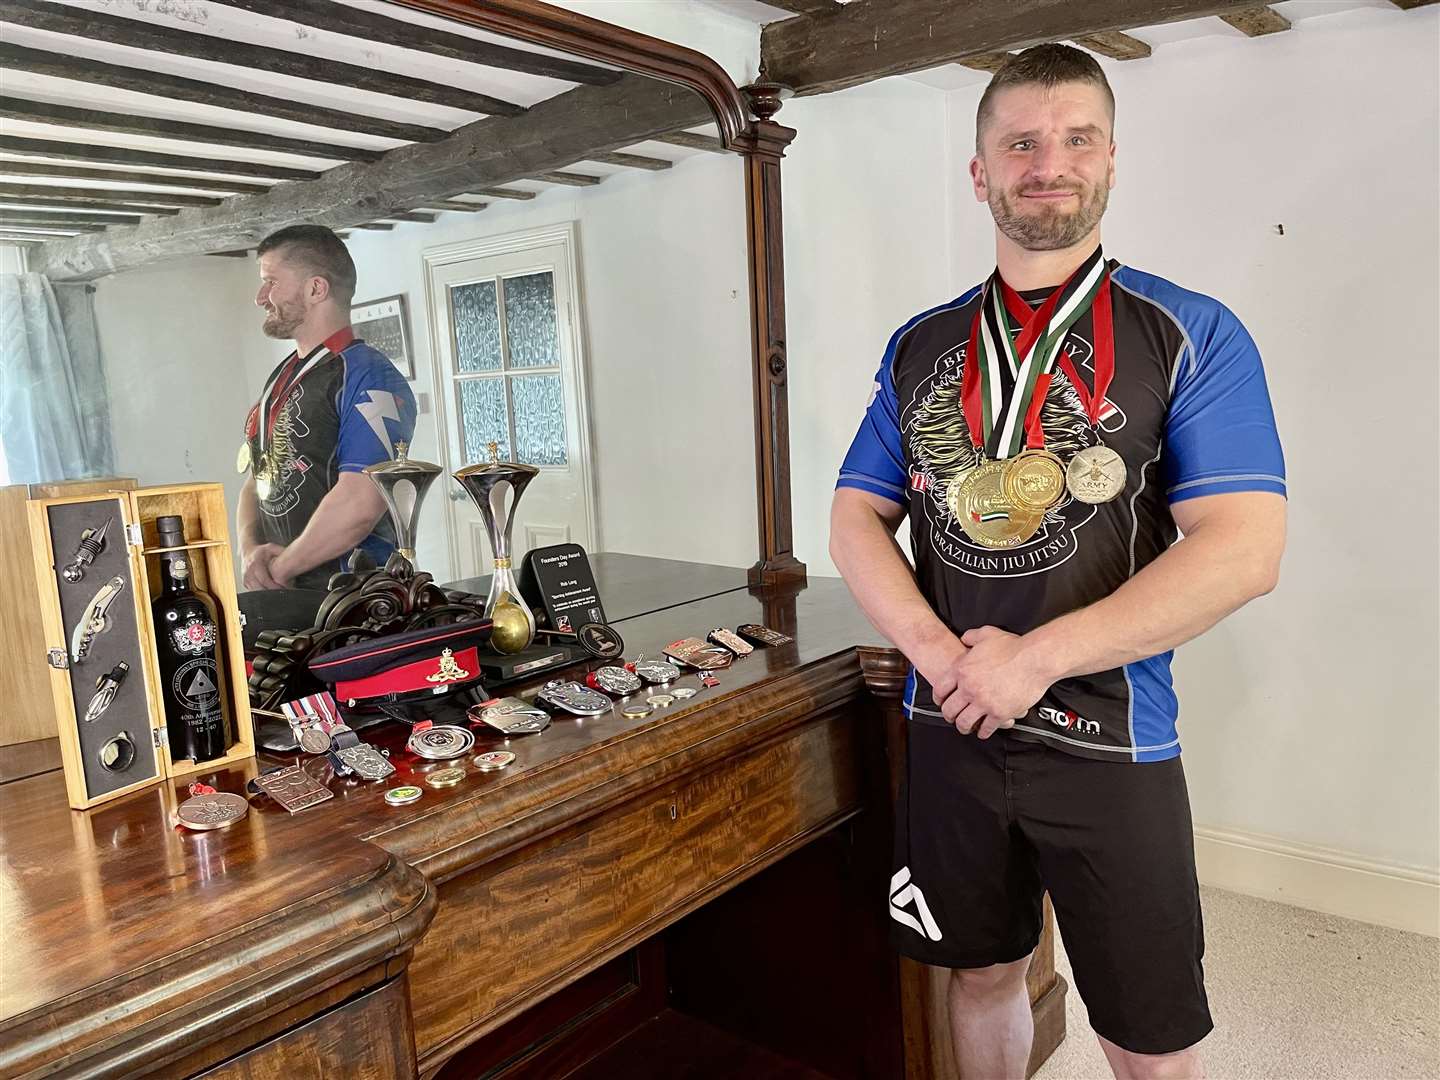 Rob Long, who lives on the outskirts of Canterbury, photographed with his army and jiu-jitsu medals